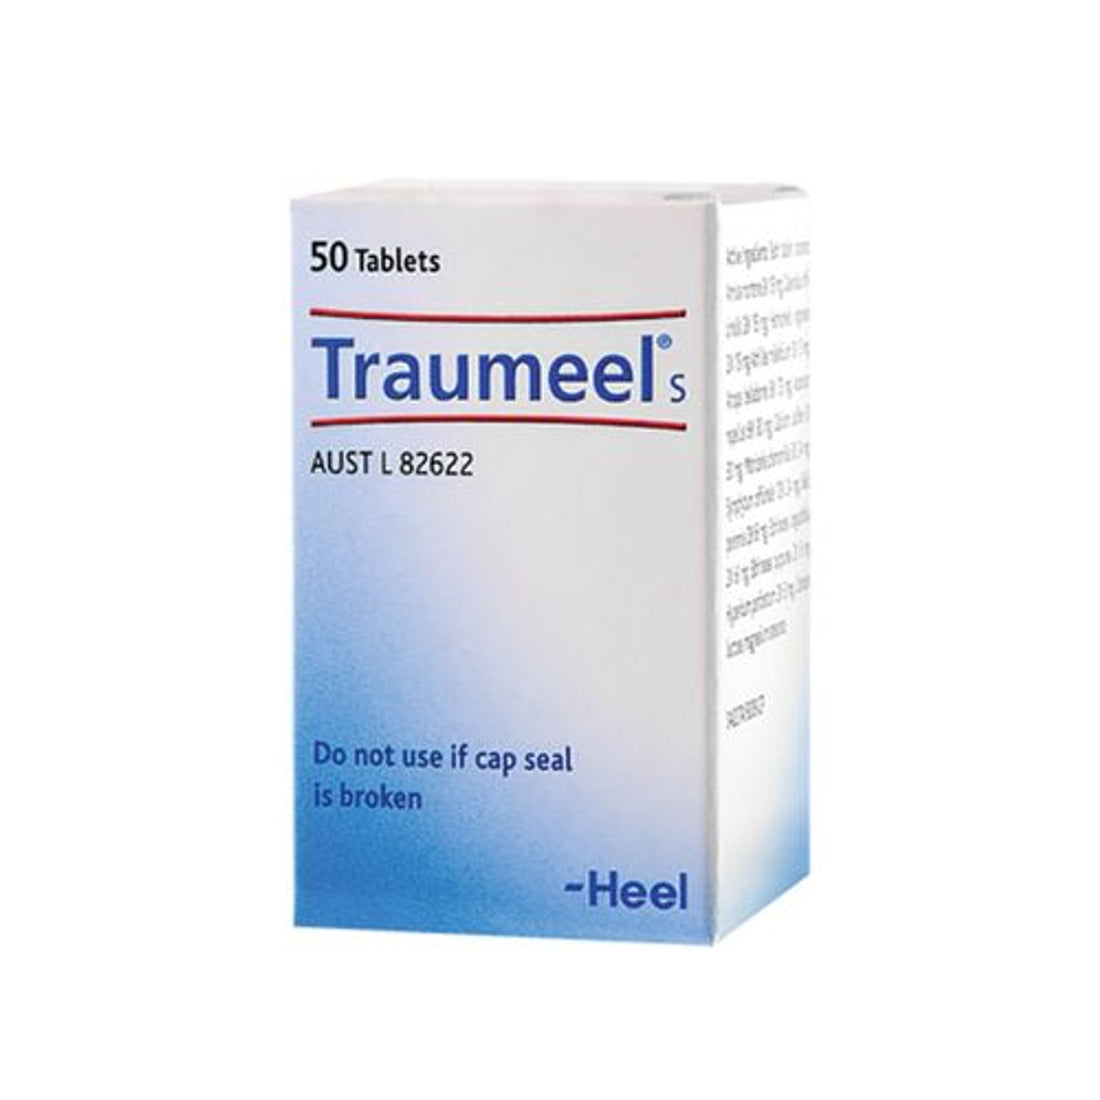 Traumeel Tablets